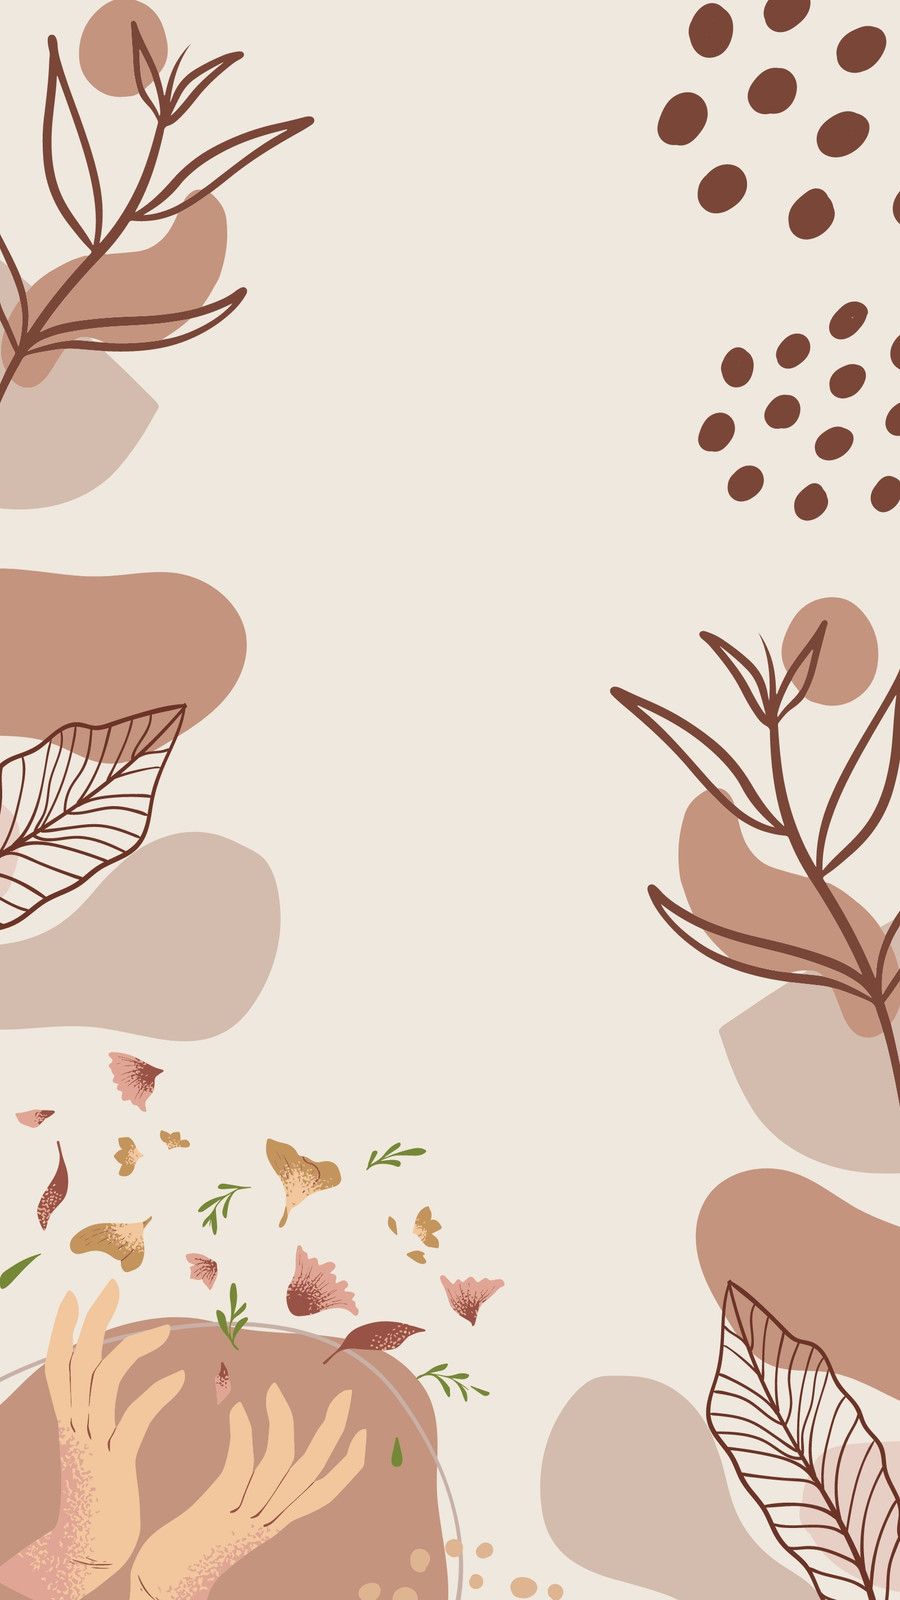 A brown and beige abstract pattern with leaves - TikTok, border, light brown